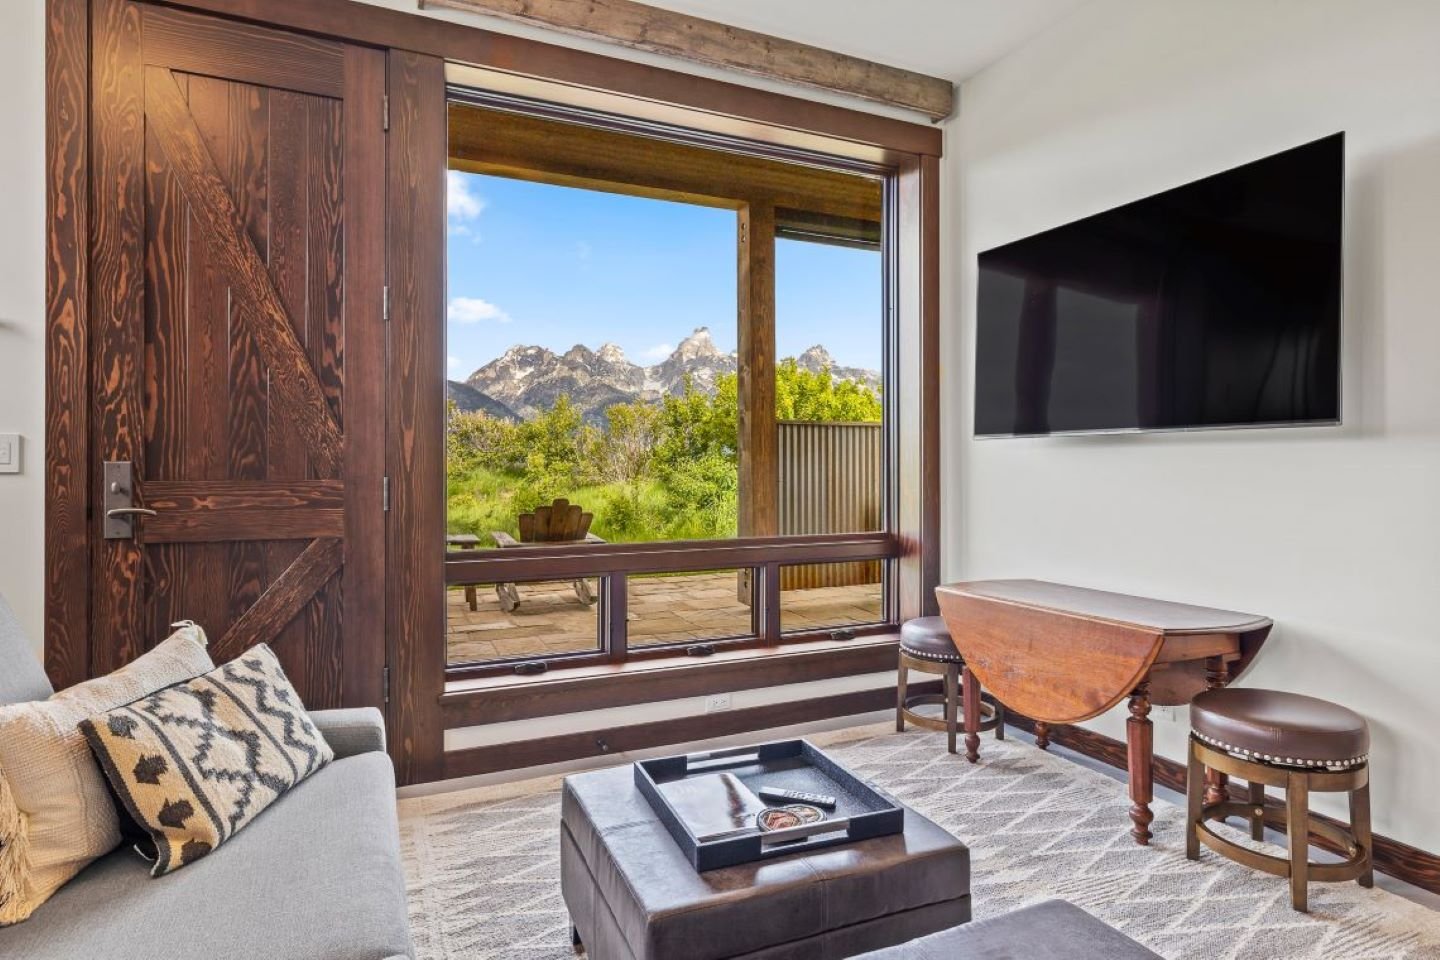 Ground floor accessory residential unit with Teton views